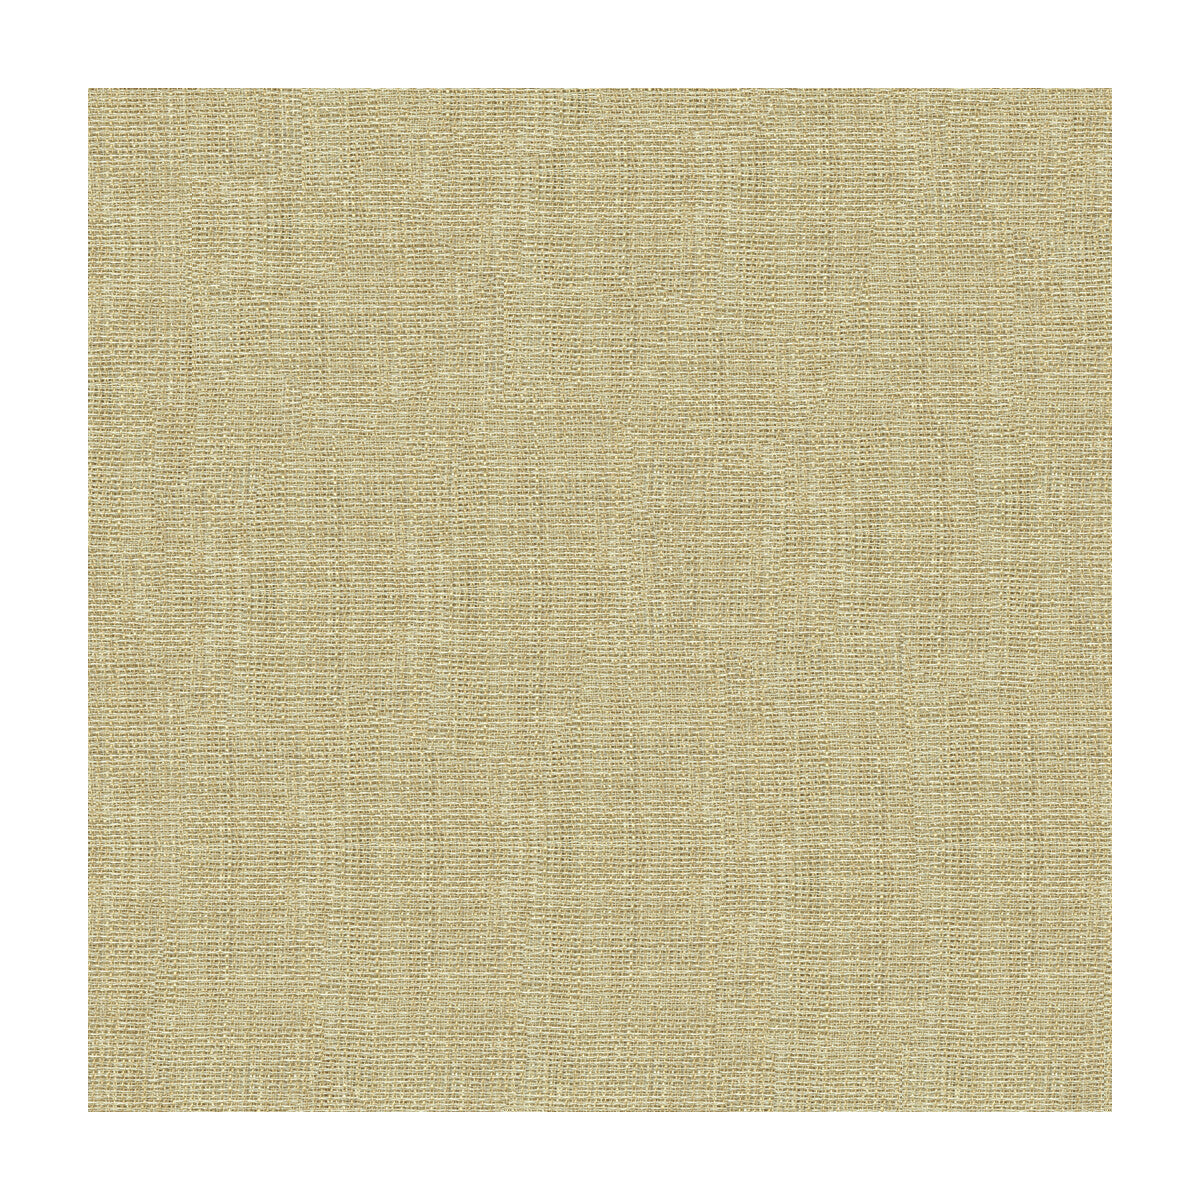 Kravet Contract fabric in 4161-1116 color - pattern 4161.1116.0 - by Kravet Contract